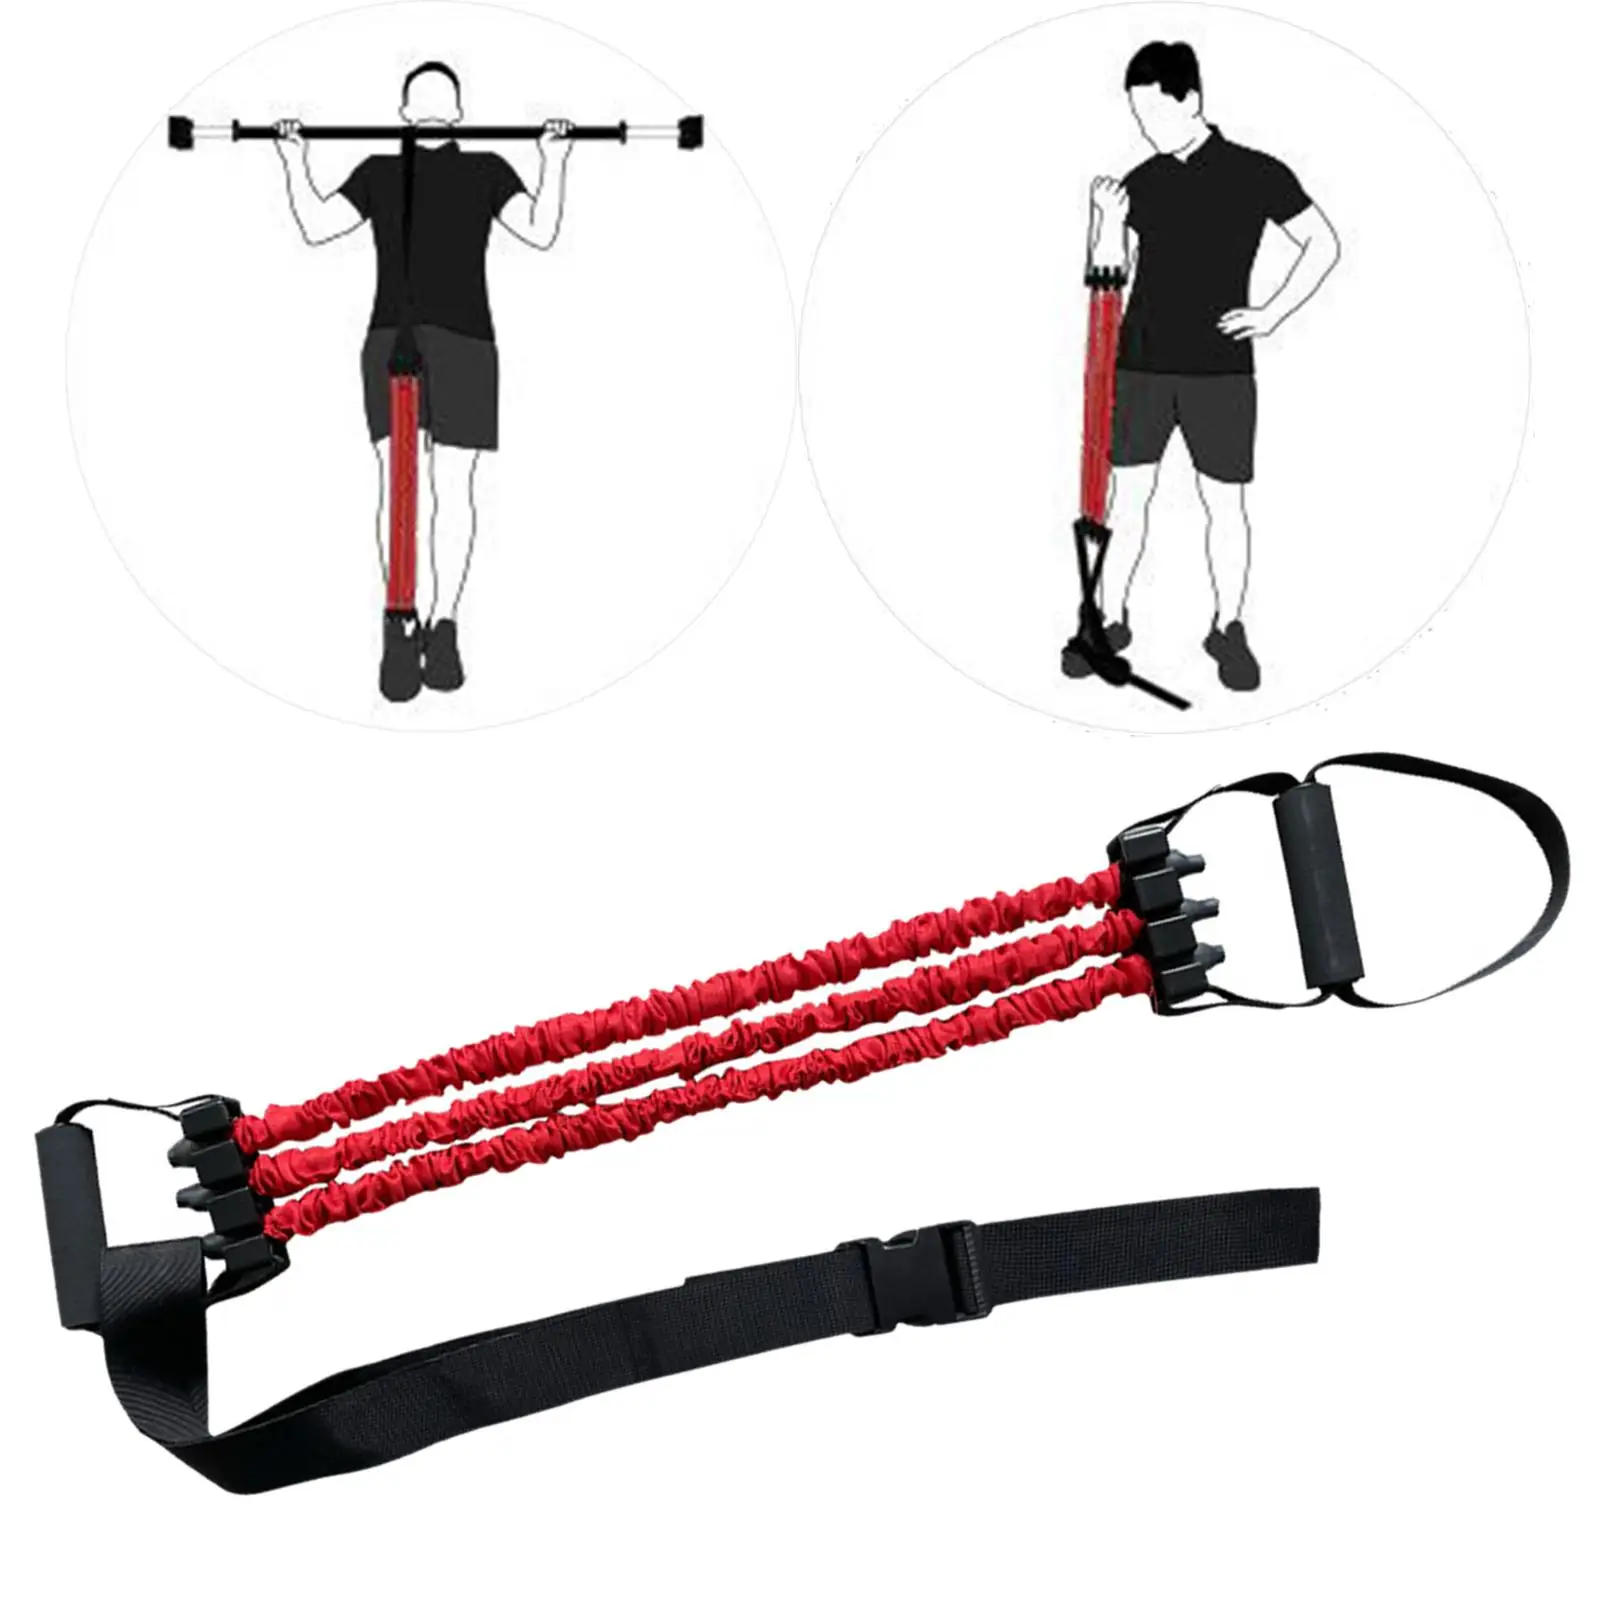 Premium pullassist band Heavy duty adjustable resistance bands to improve